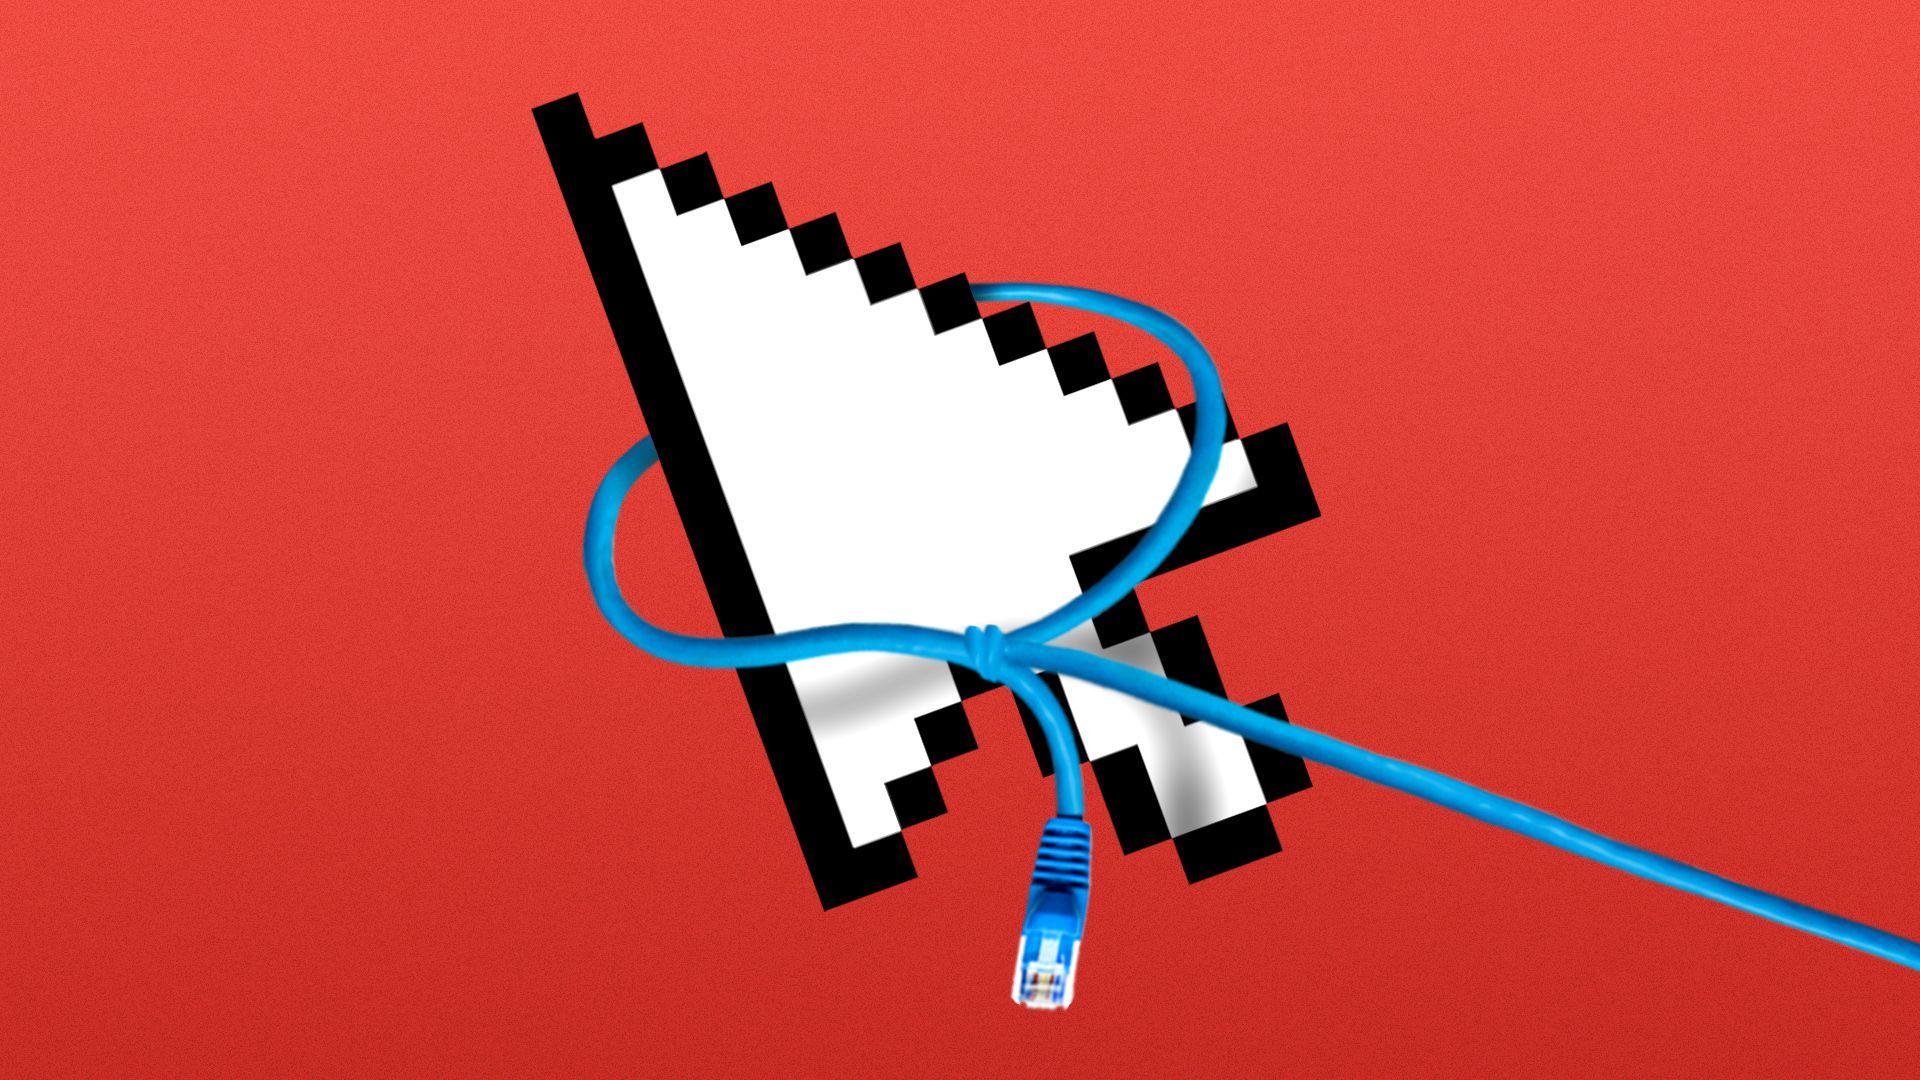 Illustration of an arrow cursor being lassoed by a blue ethernet cable